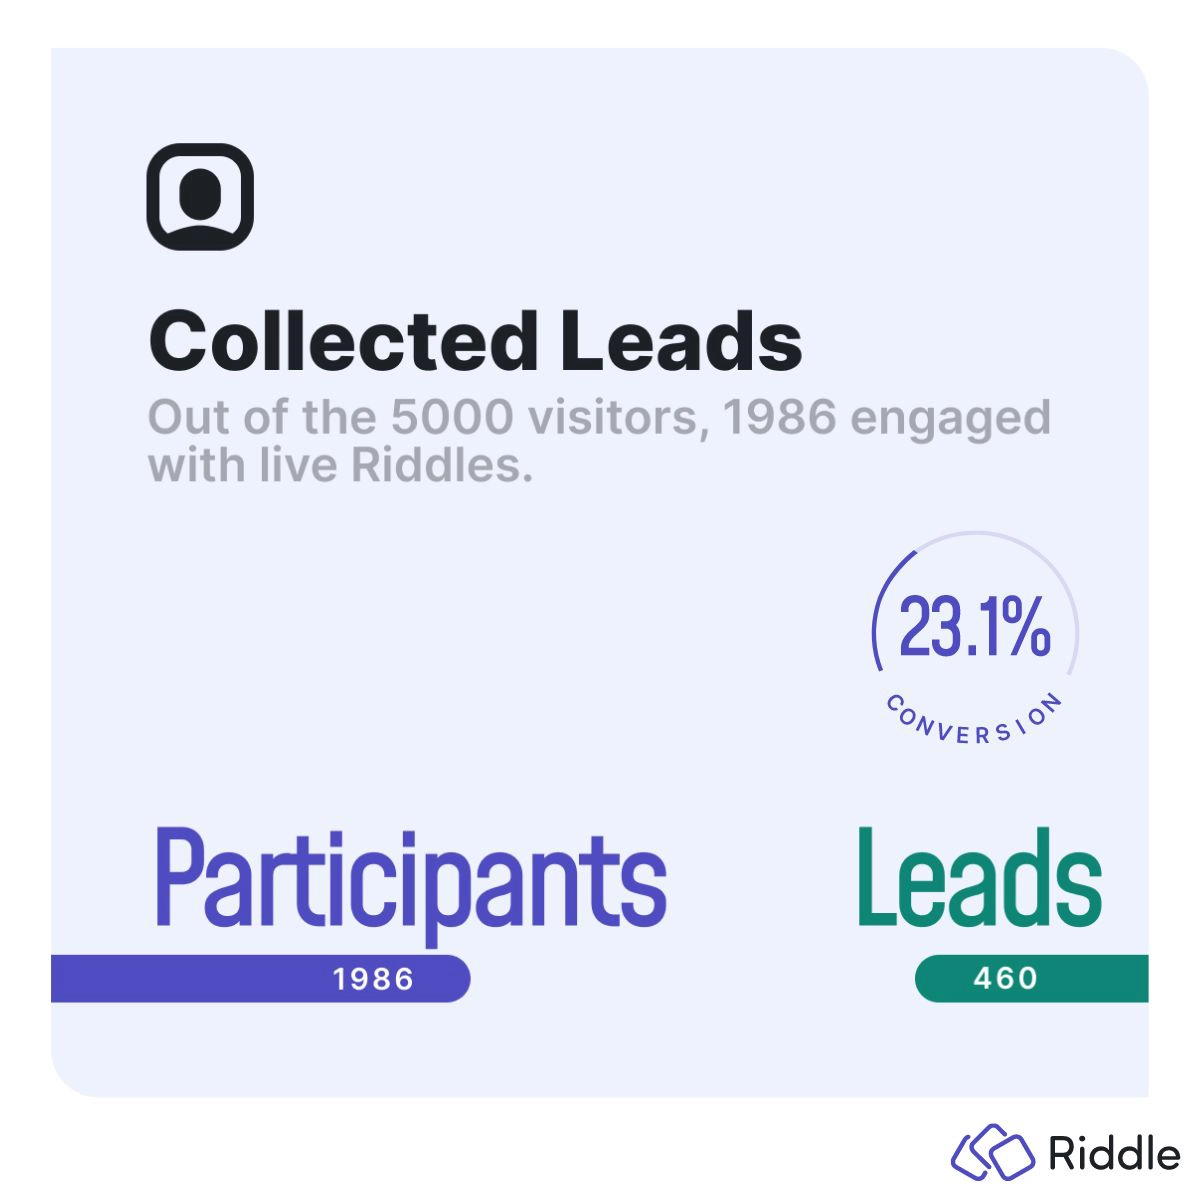 riddle at the champions league finals - 23% conversion rate
